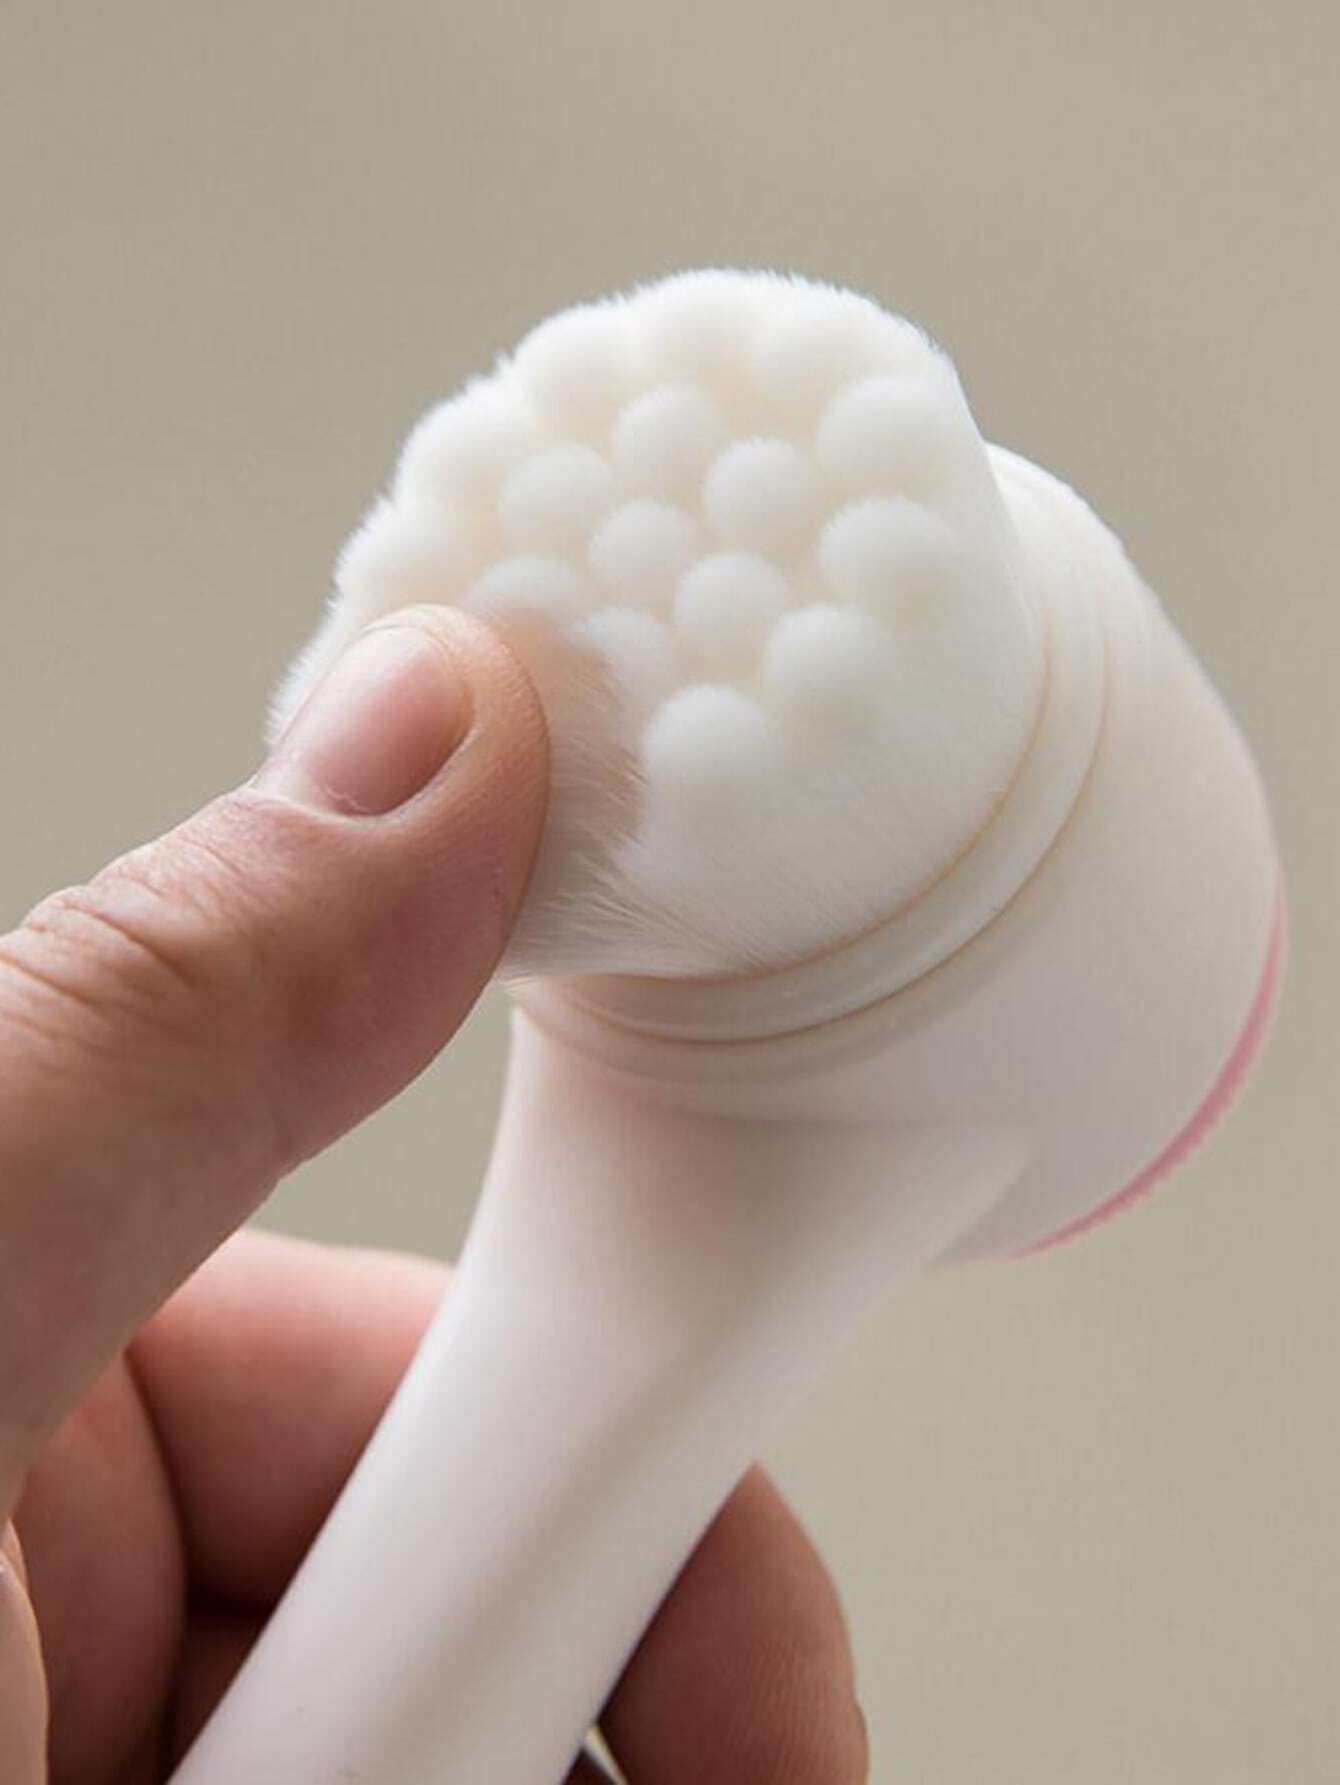 2 In 1 Face Cleansing Brush 1pc Facial Cleansing Exfoliating Brush With Ultra Fine Soft Pore Deep Cleansing Silicone Double Side Face Wash Scrub Brush For Massaging Skincare Makeup Removal Random Color - Healthier Me Beauty, LLC